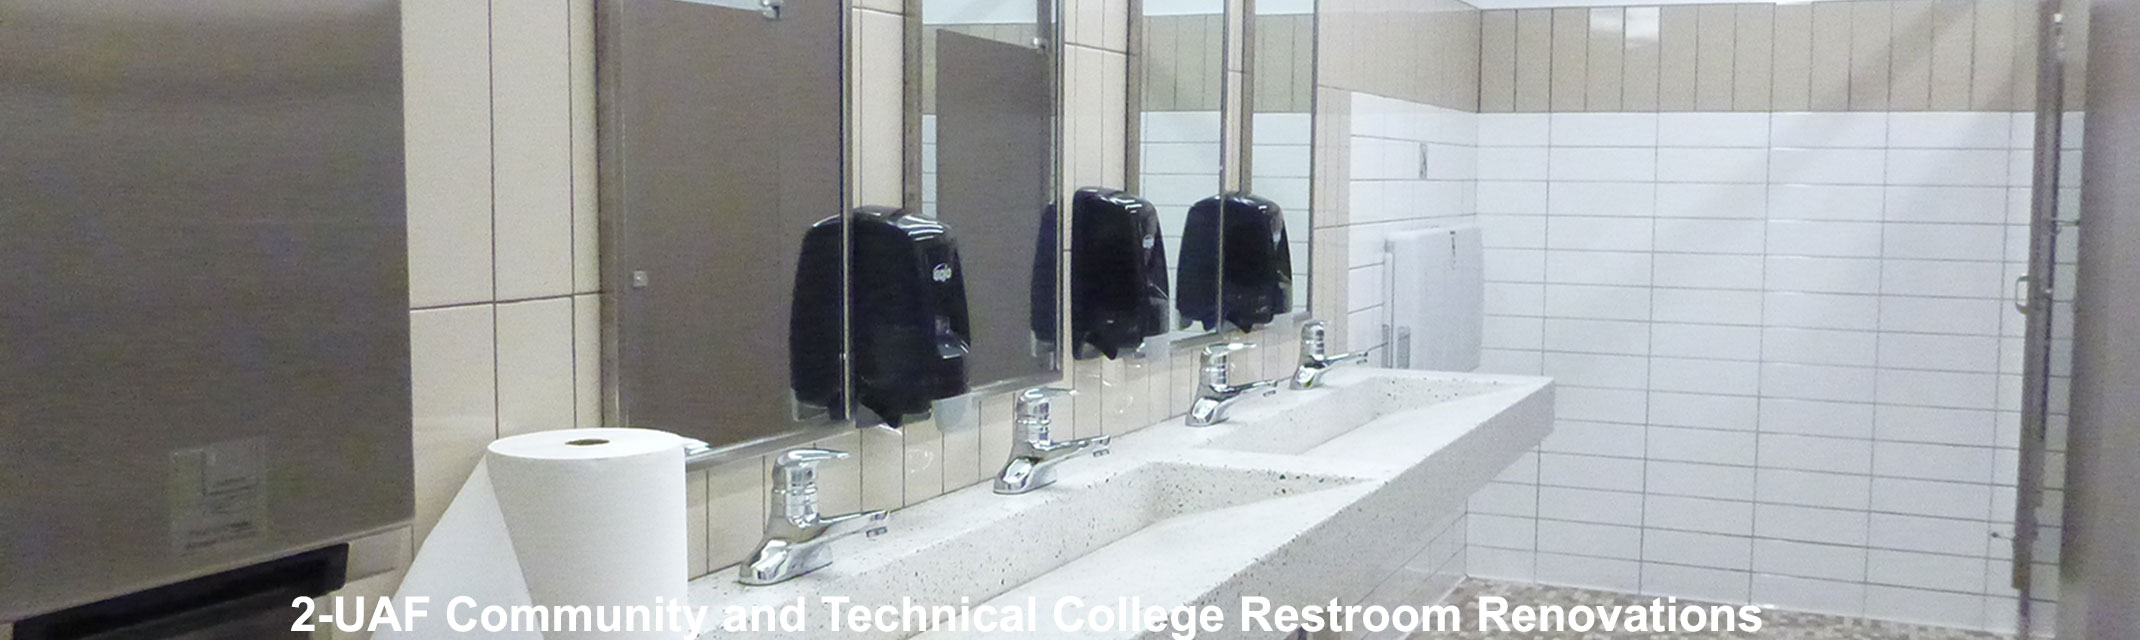 UAF Community and Technical College restroom renovations